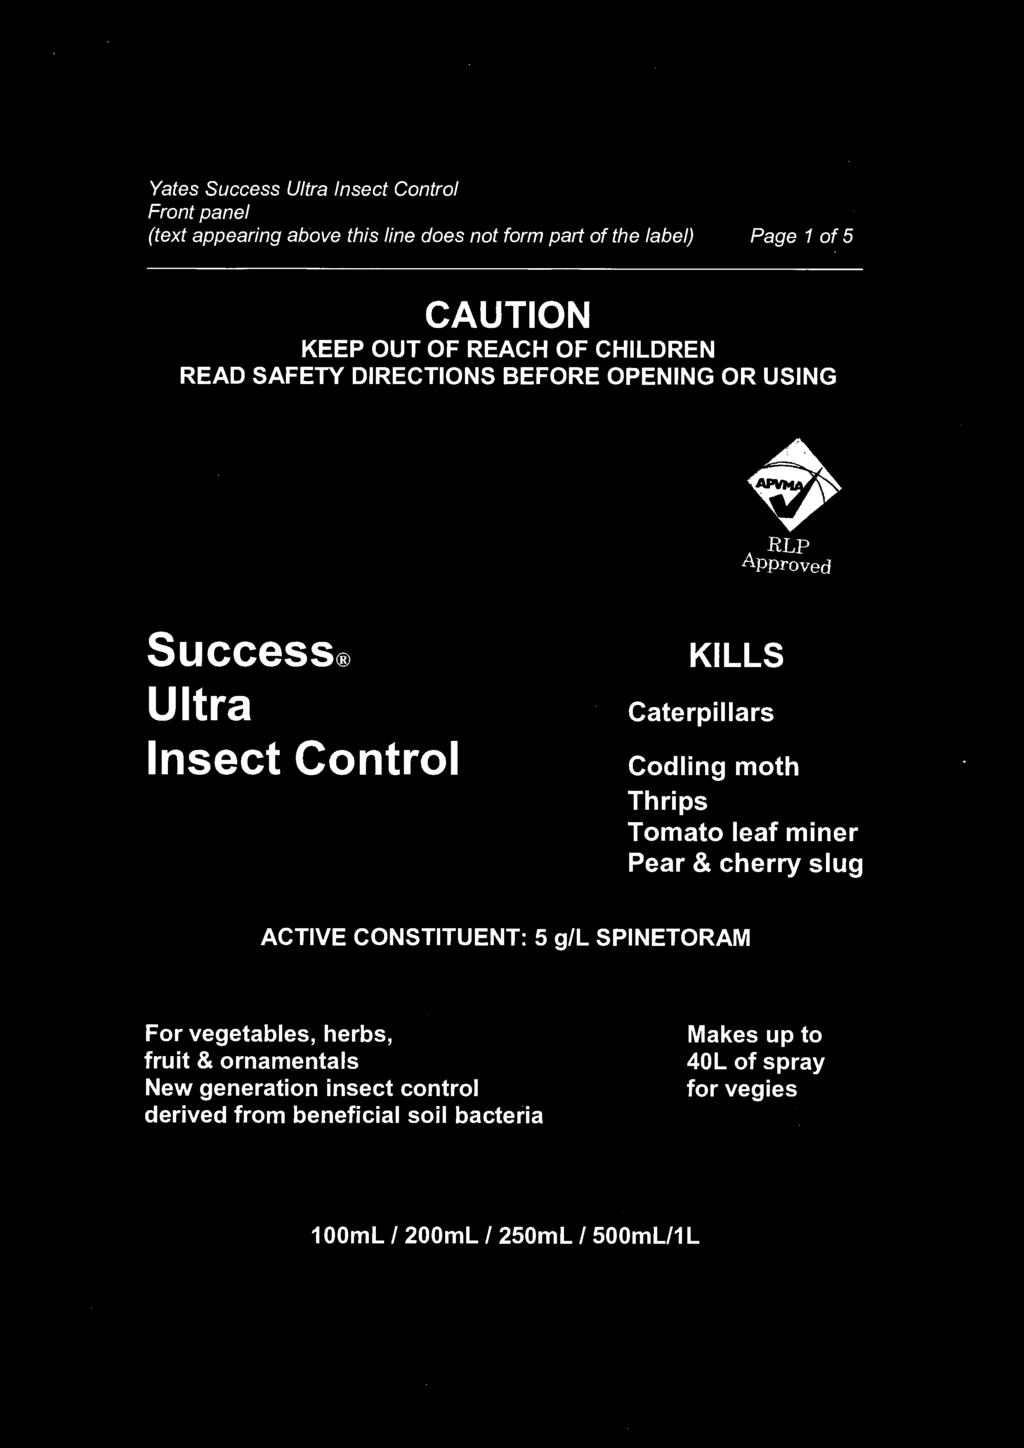 ' ' Yates Success Ultra Insect Control Front panel Page 1 of 5 CAUTION KEEP OUT OF REACH OF CHILDREN READ SAFETY DIRECTIONS